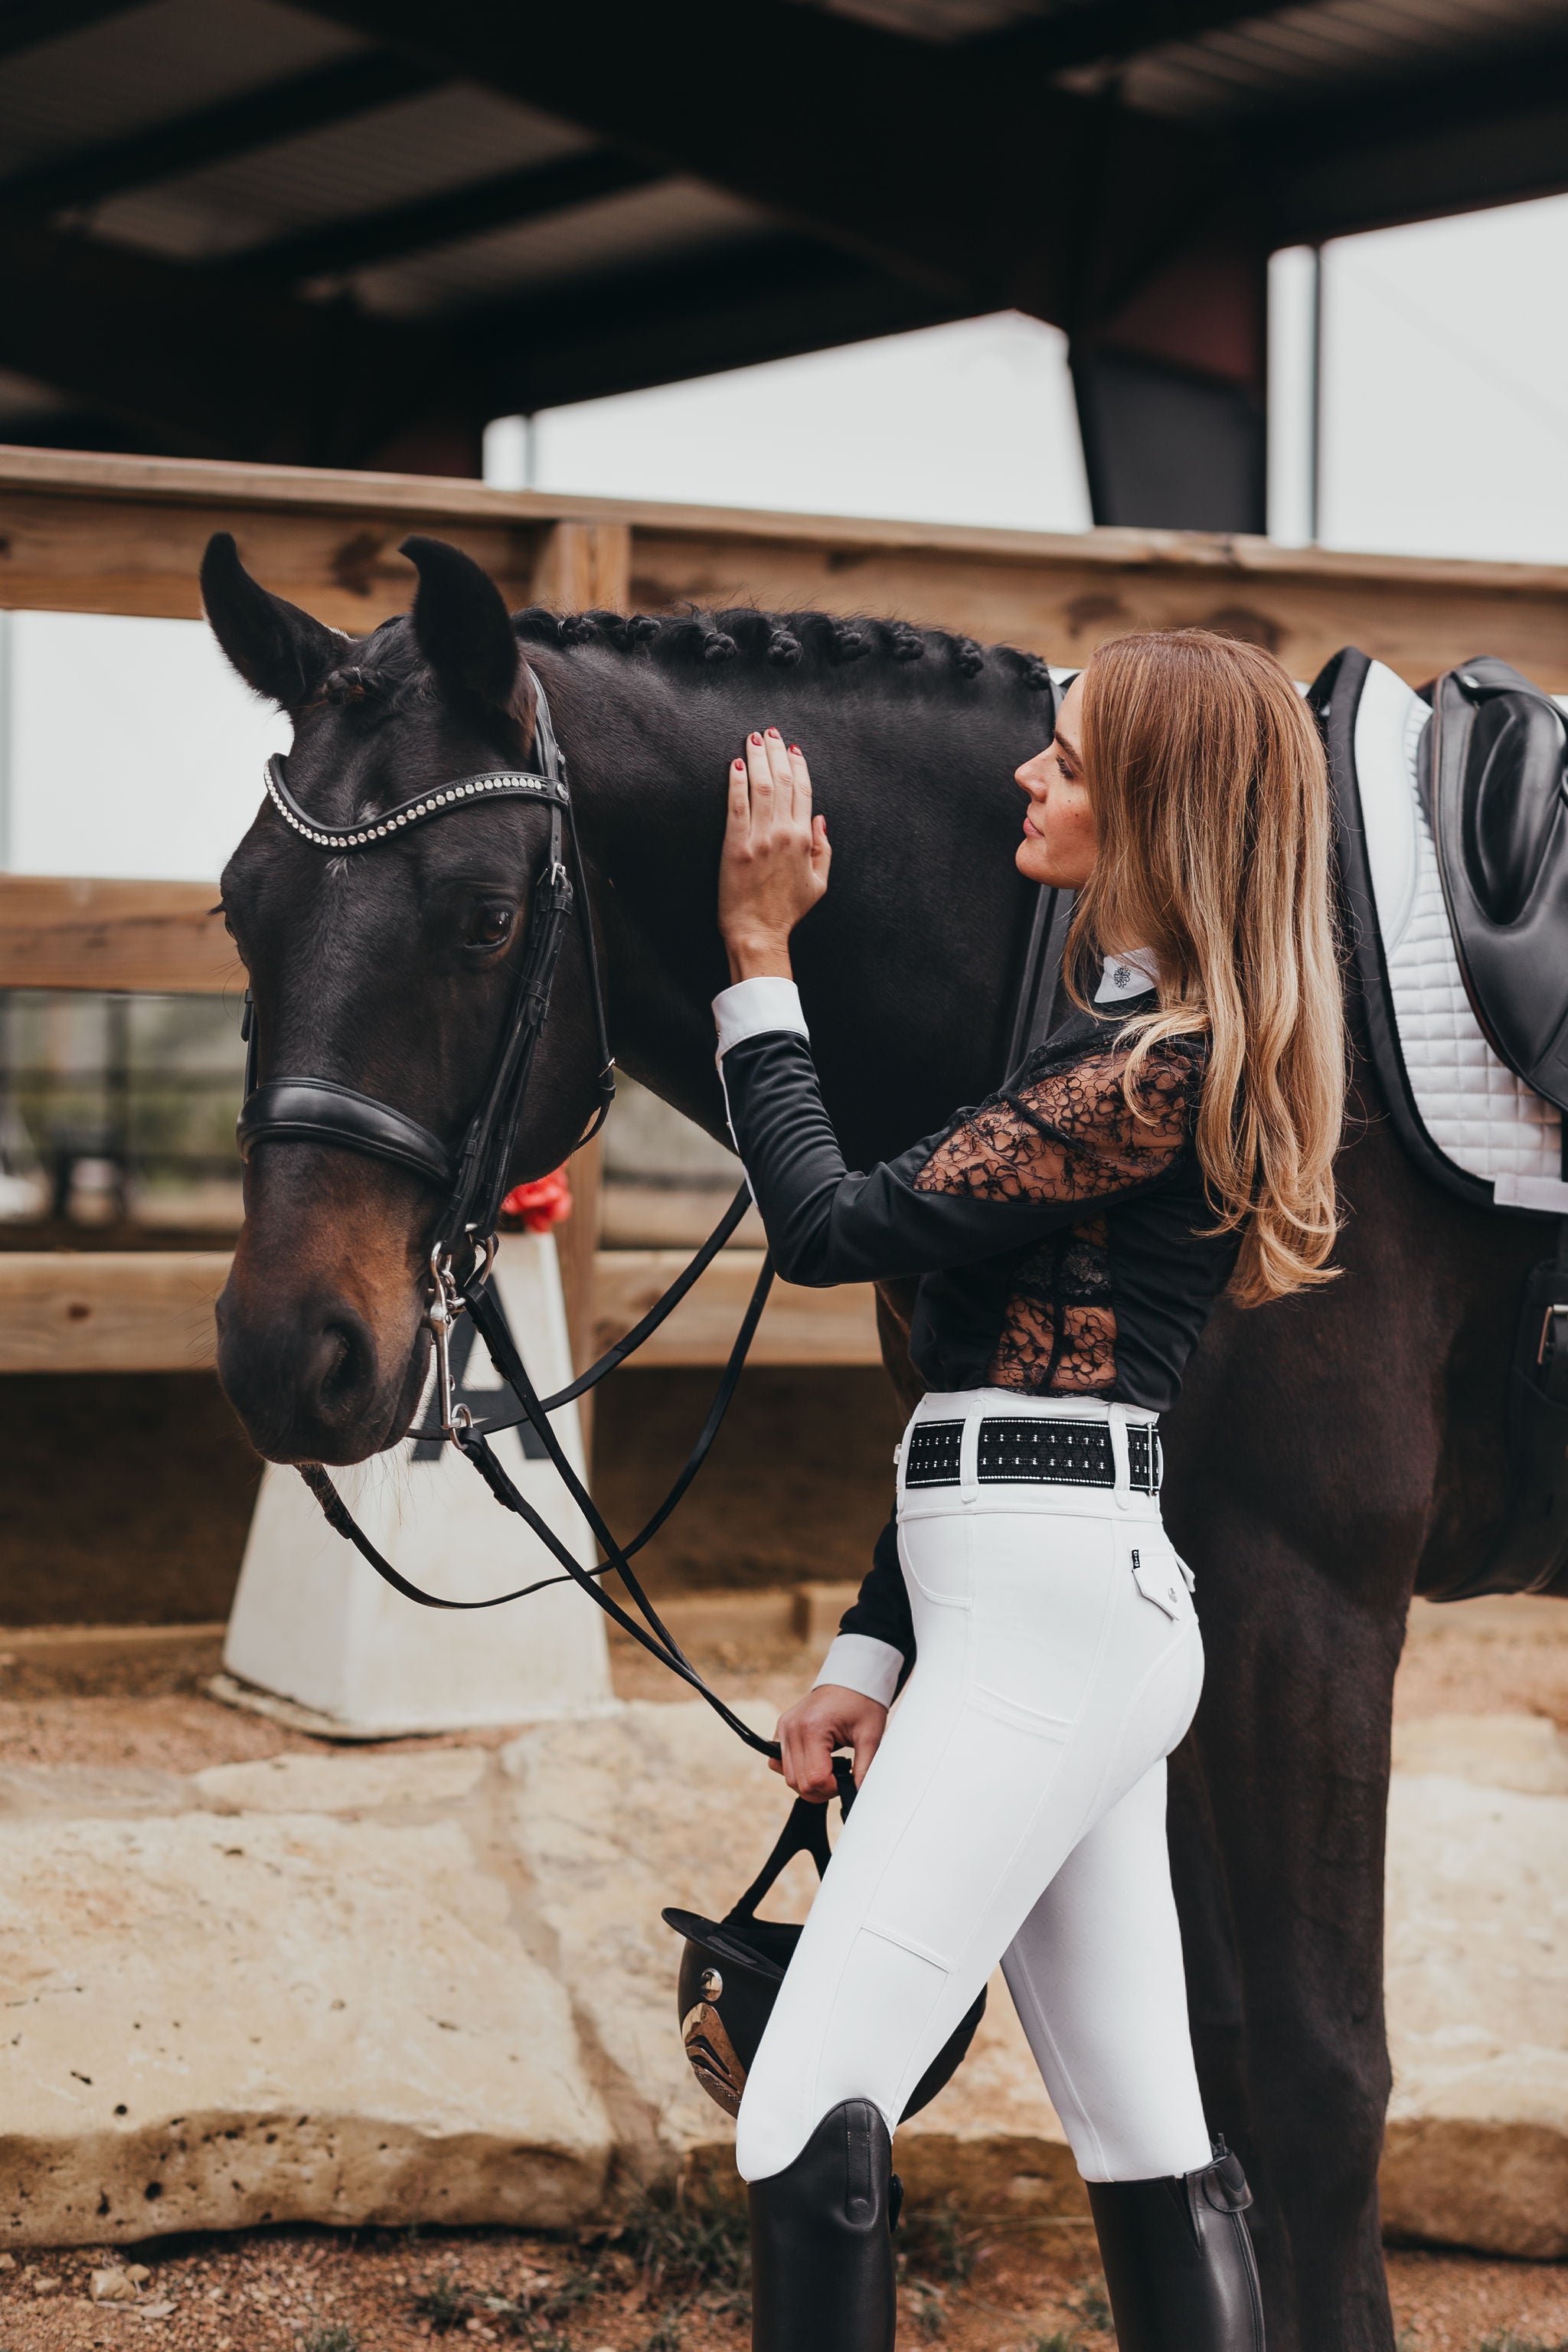 Canter Culture's high waisted competition white riding pants are flattering on every body size.